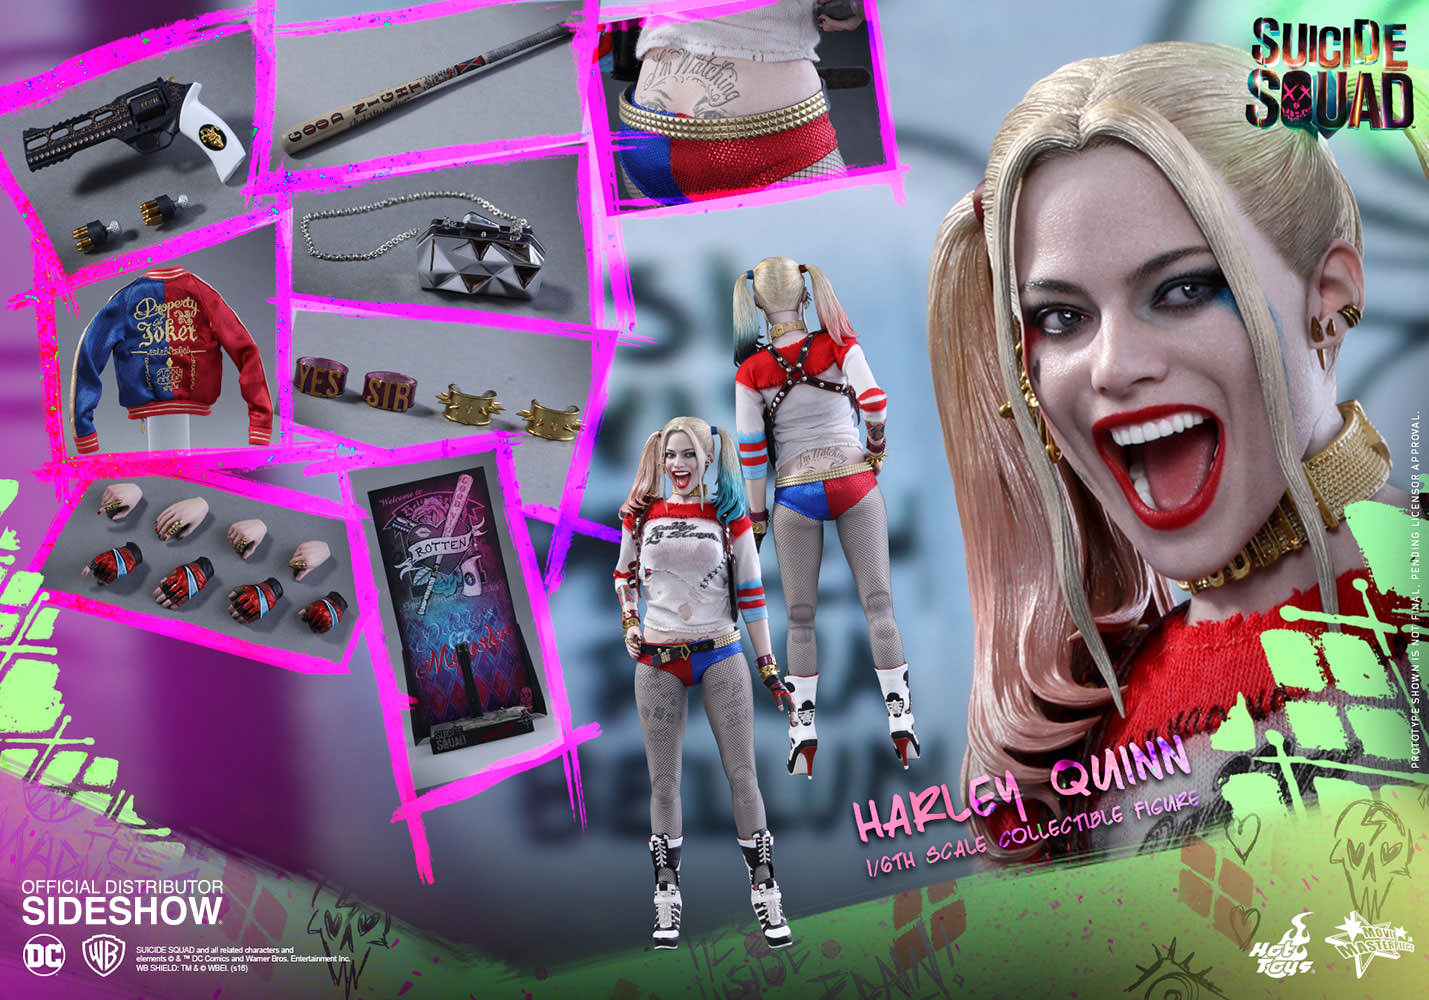 Hot Toys 1/6 Suicide Squad Harley Quinn Sixth Scale Figure MMS383